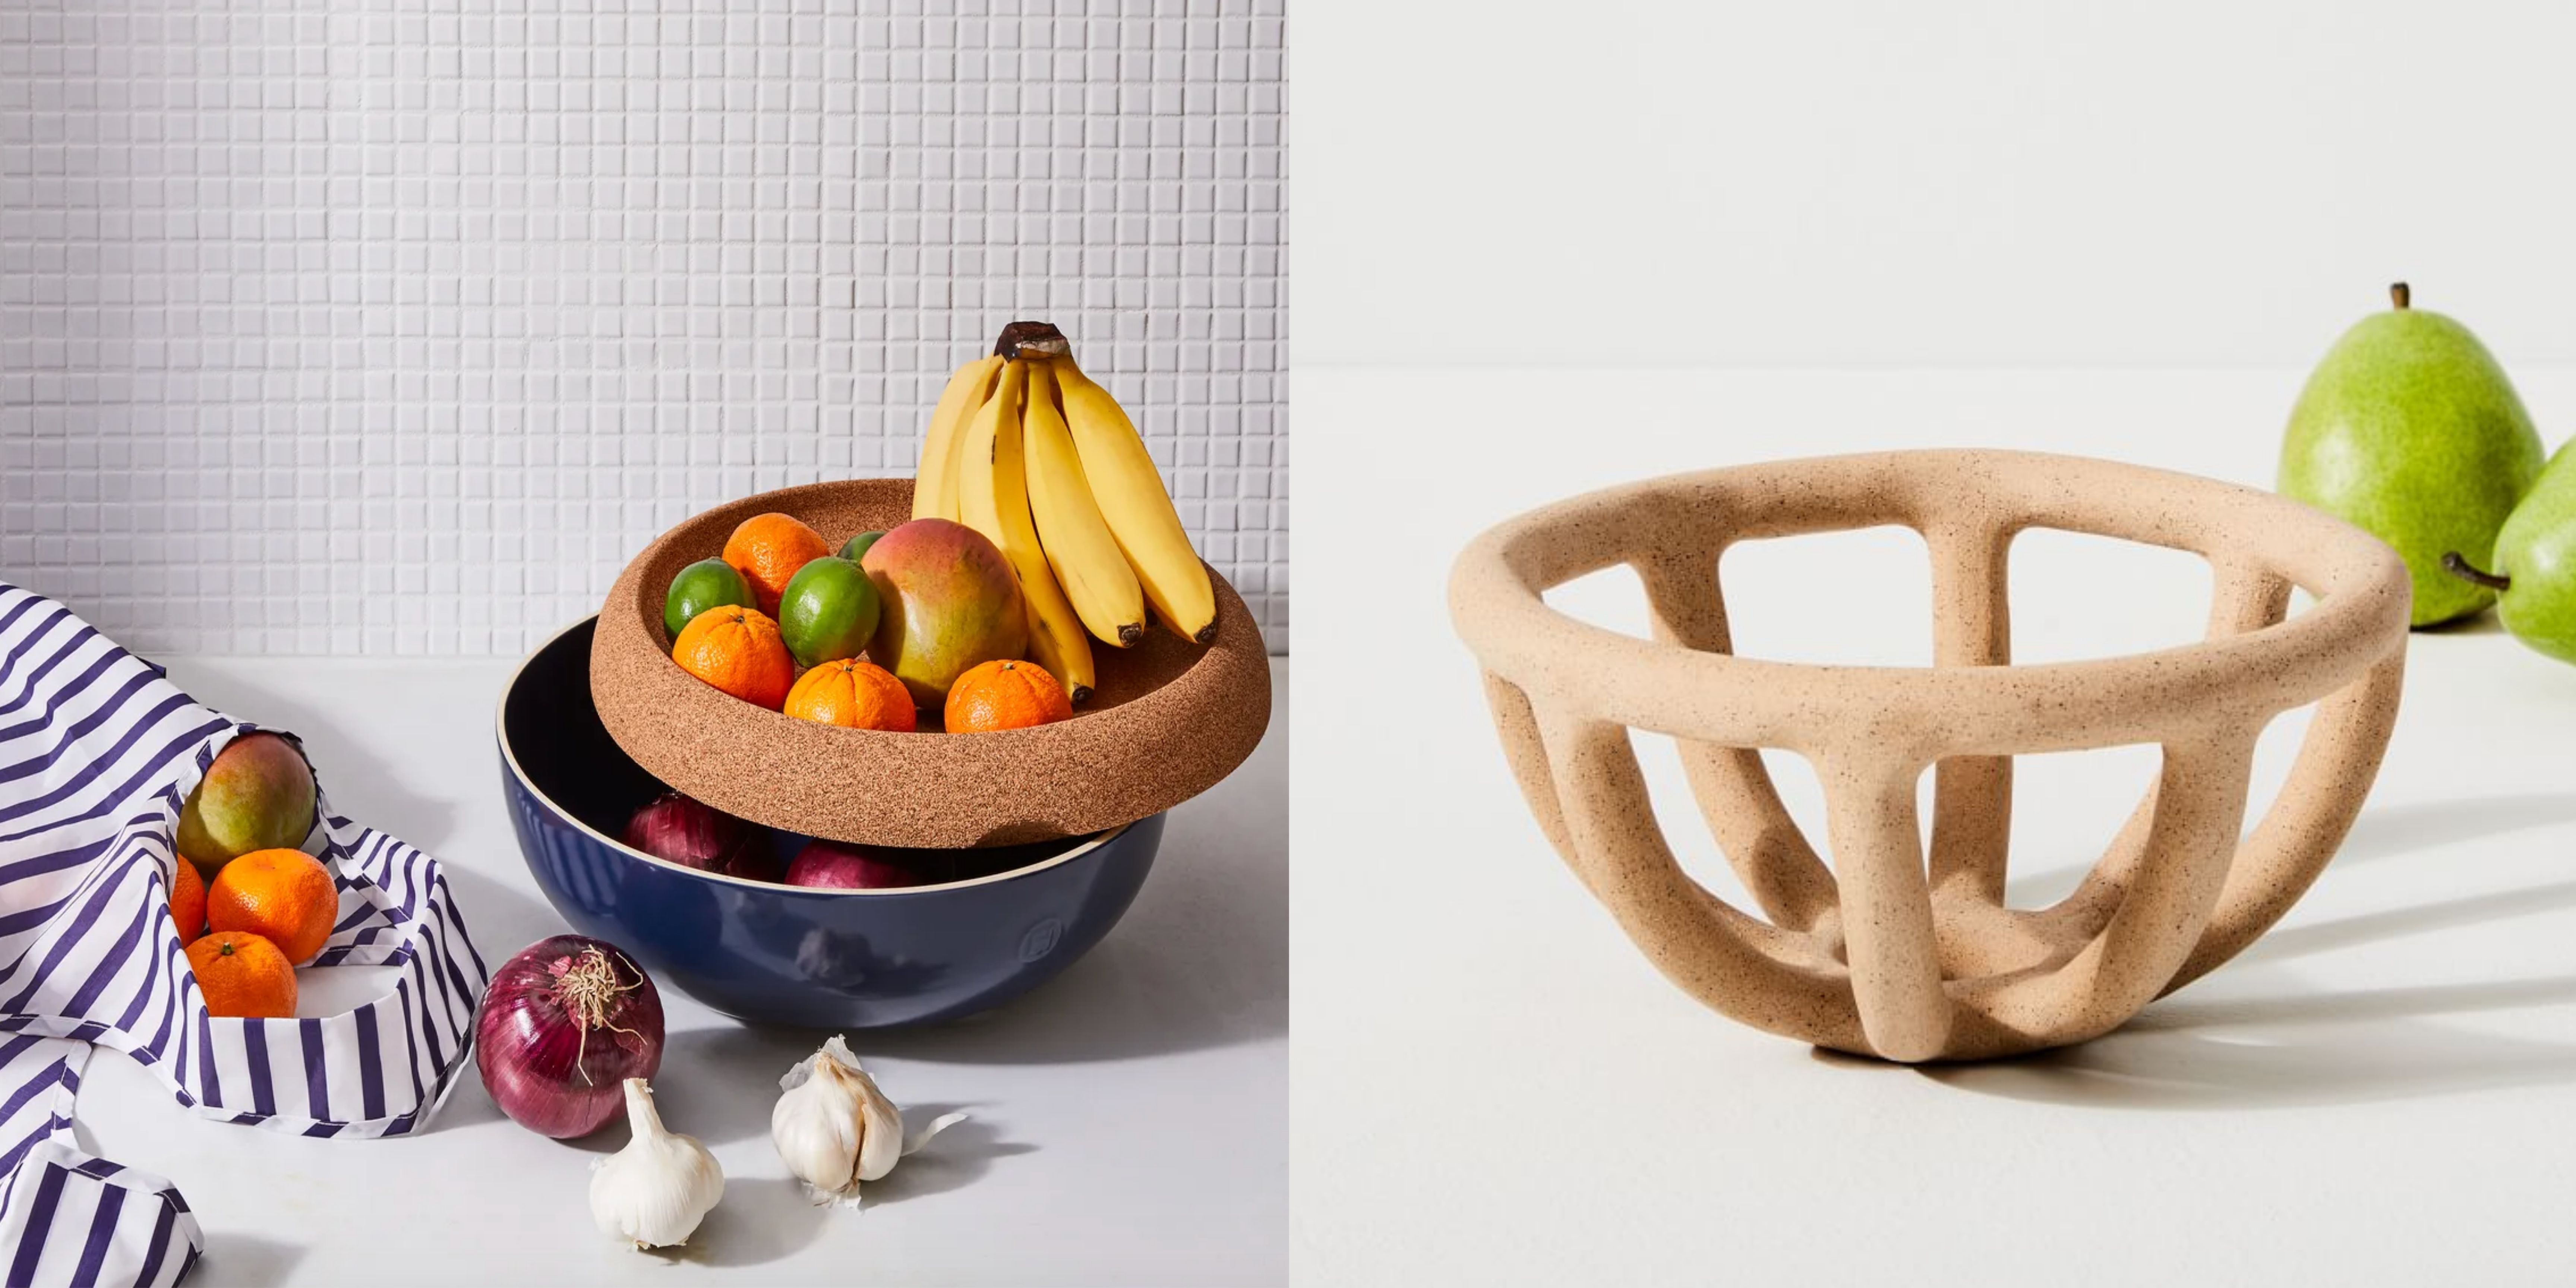 Best Fruit Bowl to Keep Produce From Rotting Review